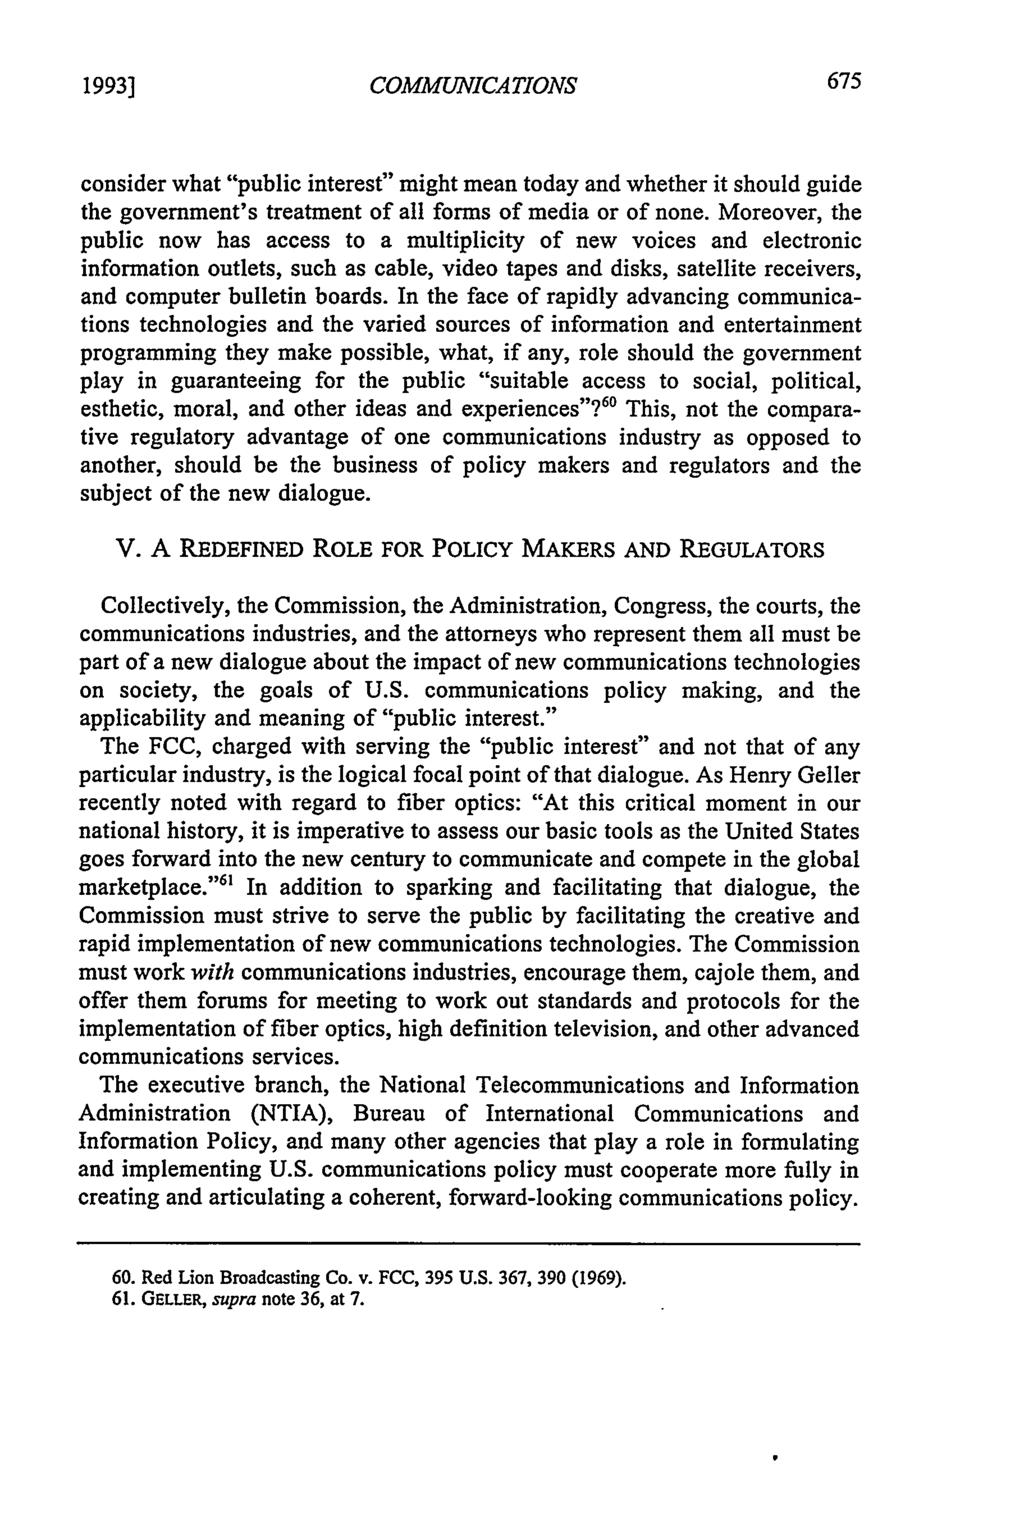 1993] COMMUNICATIONS consider what "public interest" might mean today and whether it should guide the government's treatment of all forms of media or of none.